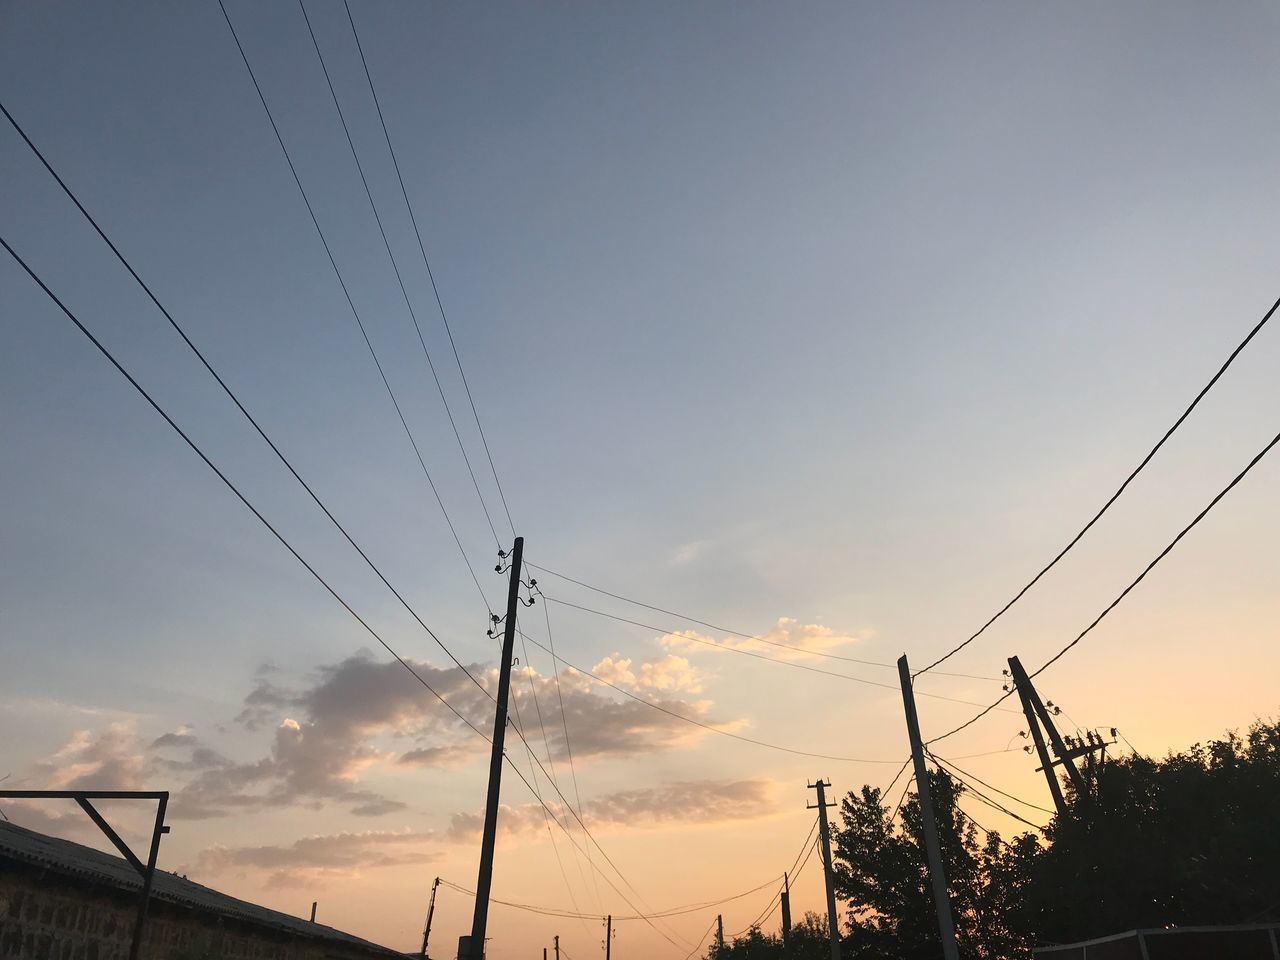 sky, cable, electricity, power line, sunset, technology, cloud - sky, connection, power supply, silhouette, electricity pylon, fuel and power generation, low angle view, nature, no people, beauty in nature, tree, plant, tranquil scene, tranquility, outdoors, telephone line, complexity